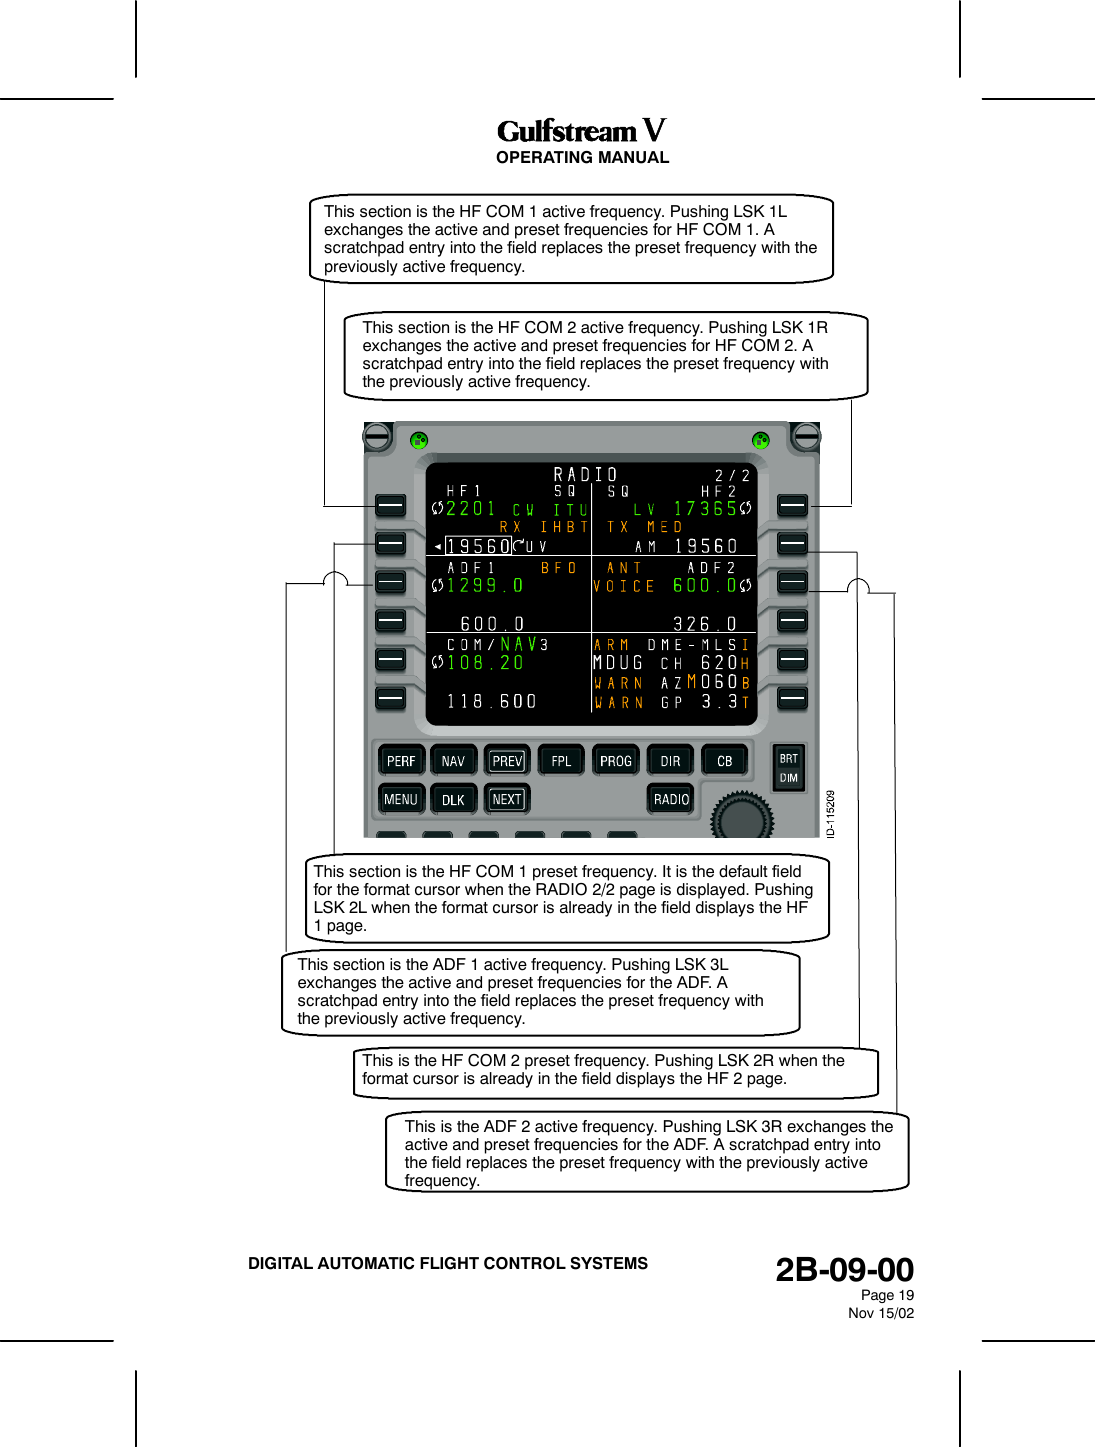 OPERATING MANUAL2B-09-00Page 19Nov 15/02DIGITAL AUTOMATIC FLIGHT CONTROL SYSTEMSThis section is the HF COM 1 active frequency. Pushing LSK 1Lexchanges the active and preset frequencies for HF COM 1. Ascratchpad entry into the field replaces the preset frequency with thepreviously active frequency.This section is the HF COM 2 active frequency. Pushing LSK 1Rexchanges the active and preset frequencies for HF COM 2. Ascratchpad entry into the field replaces the preset frequency withthe previously active frequency.This section is the HF COM 1 preset frequency. It is the default fieldfor the format cursor when the RADIO 2/2 page is displayed. PushingLSK 2L when the format cursor is already in the field displays the HF1 page.This section is the ADF 1 active frequency. Pushing LSK 3Lexchanges the active and preset frequencies for the ADF. Ascratchpad entry into the field replaces the preset frequency withthe previously active frequency.This is the HF COM 2 preset frequency. Pushing LSK 2R when theformat cursor is already in the field displays the HF 2 page.This is the ADF 2 active frequency. Pushing LSK 3R exchanges theactive and preset frequencies for the ADF. A scratchpad entry intothe field replaces the preset frequency with the previously activefrequency.